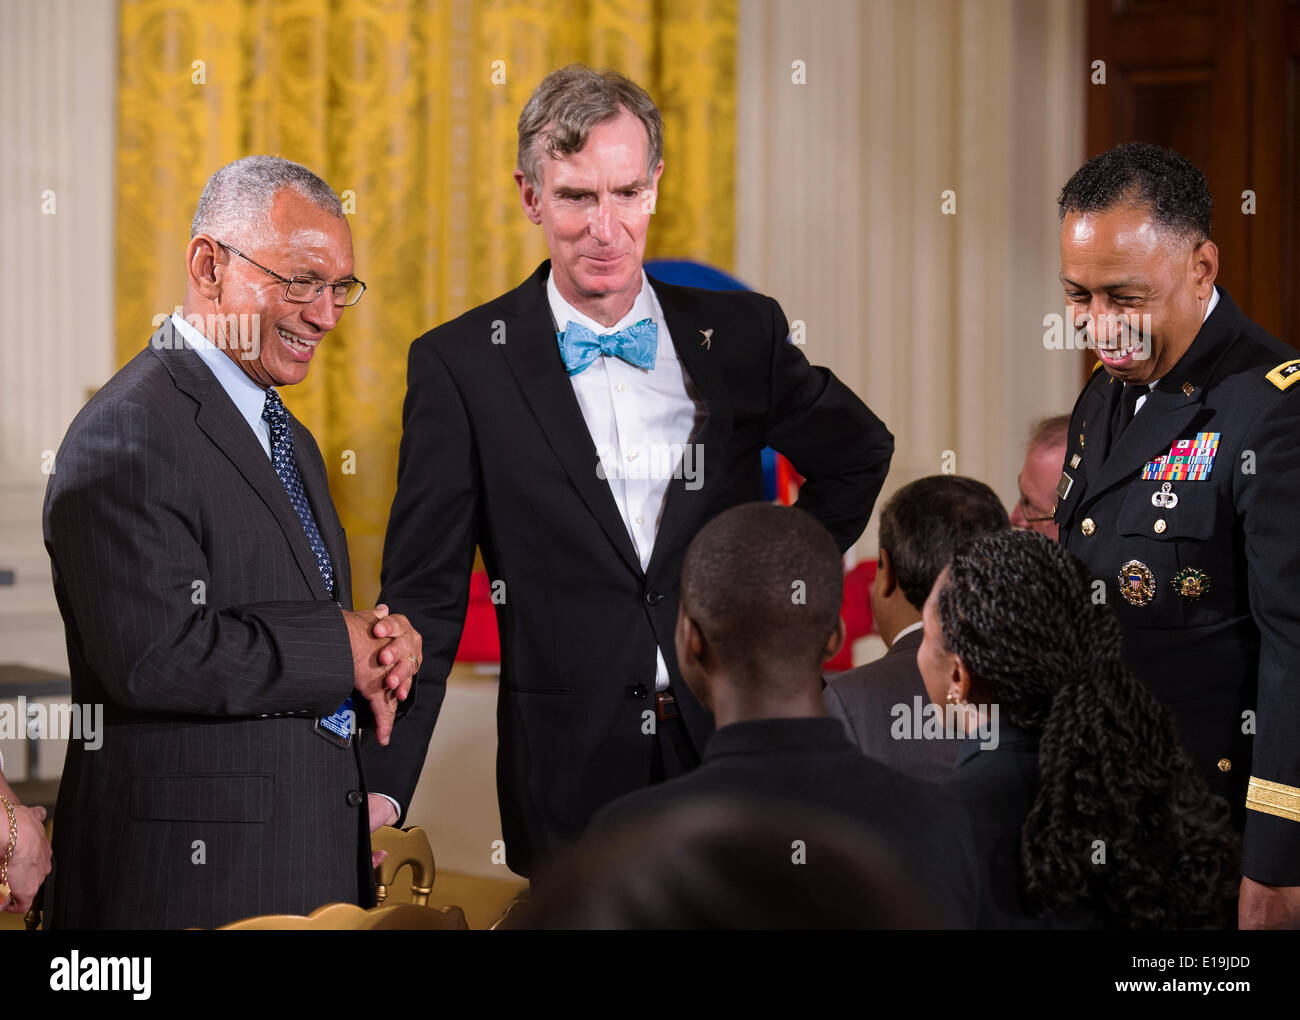 NASA Administrator Charles Bolden, left, and Bill Nye, The Science Guy, speak with students participating in the White House Science Fair in the East Room May 27, 2014 in Washington, DC. The event included 100 students from more than 30 different states who competed in science, technology, engineering, and math competitions. Stock Photo